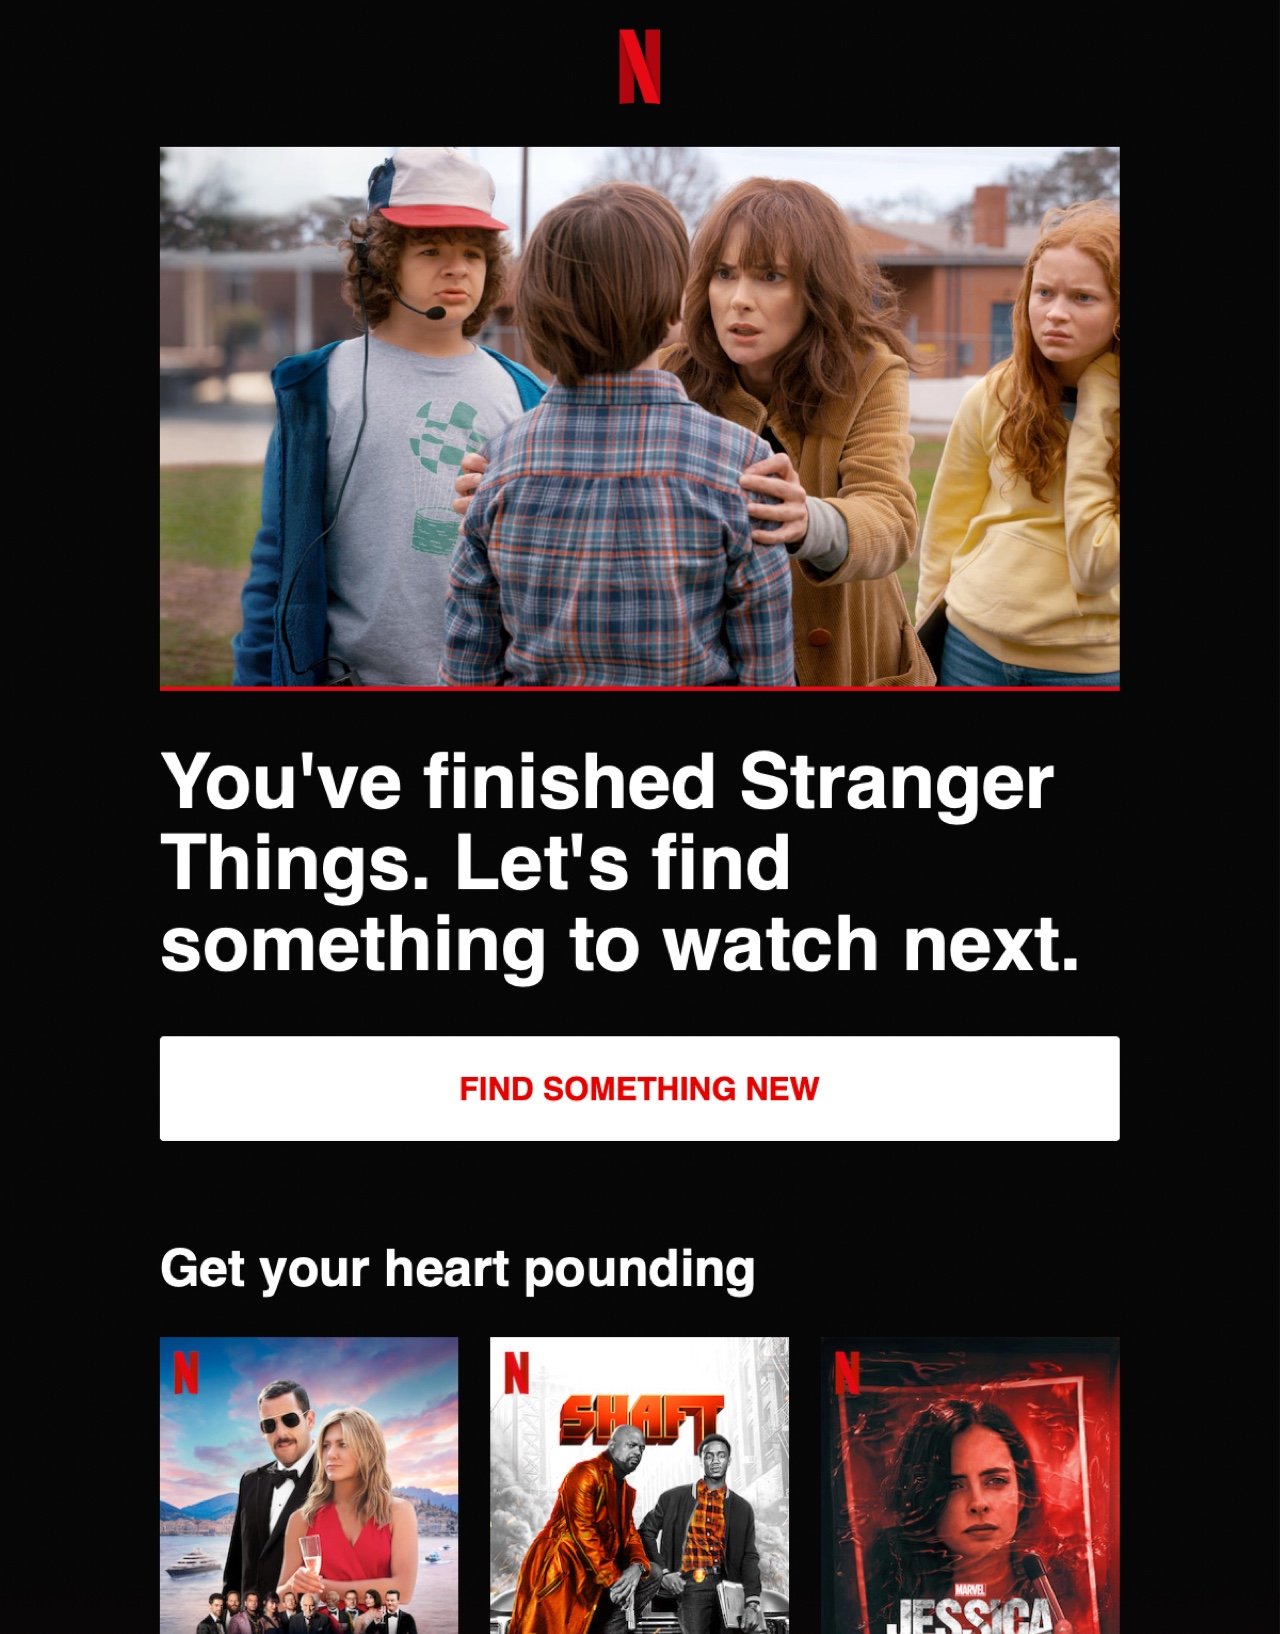 Netflix recommendation email example